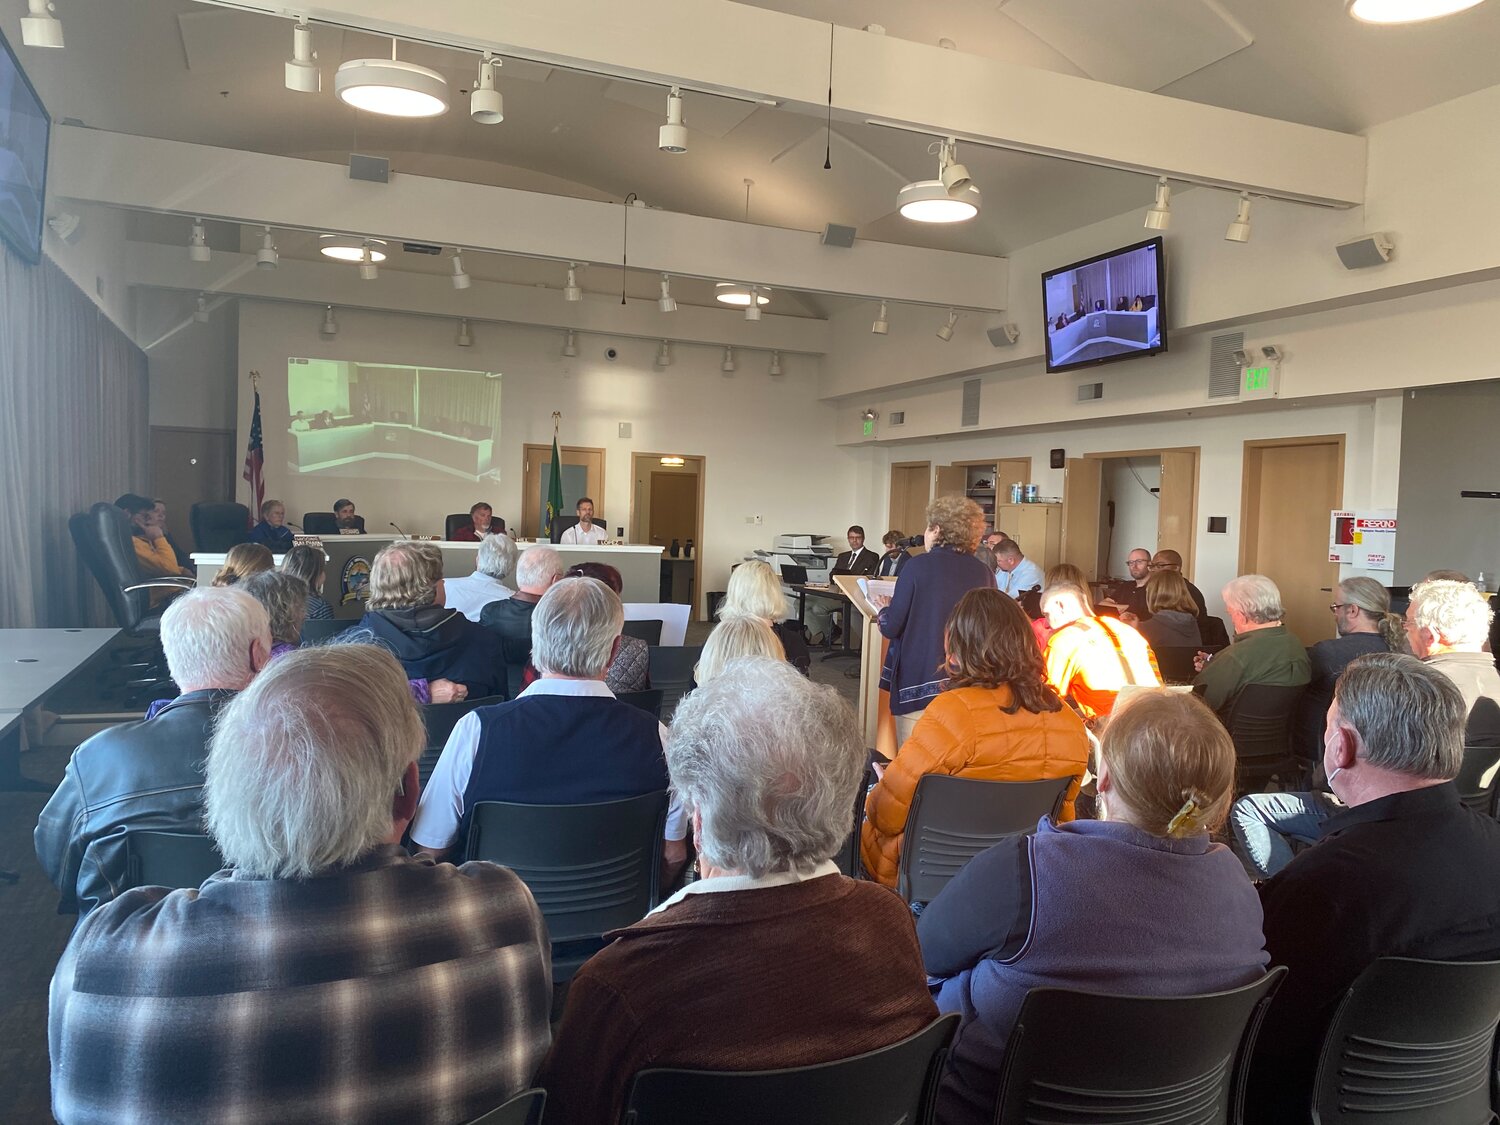 Dozens of east Blaine residents voiced concern over a proposed change to the city's PUD code that would allow large manufactured home parks in east Blaine. Blaine City Council listened to the residents’ concerns during the public comment portion of their April 24 meeting.